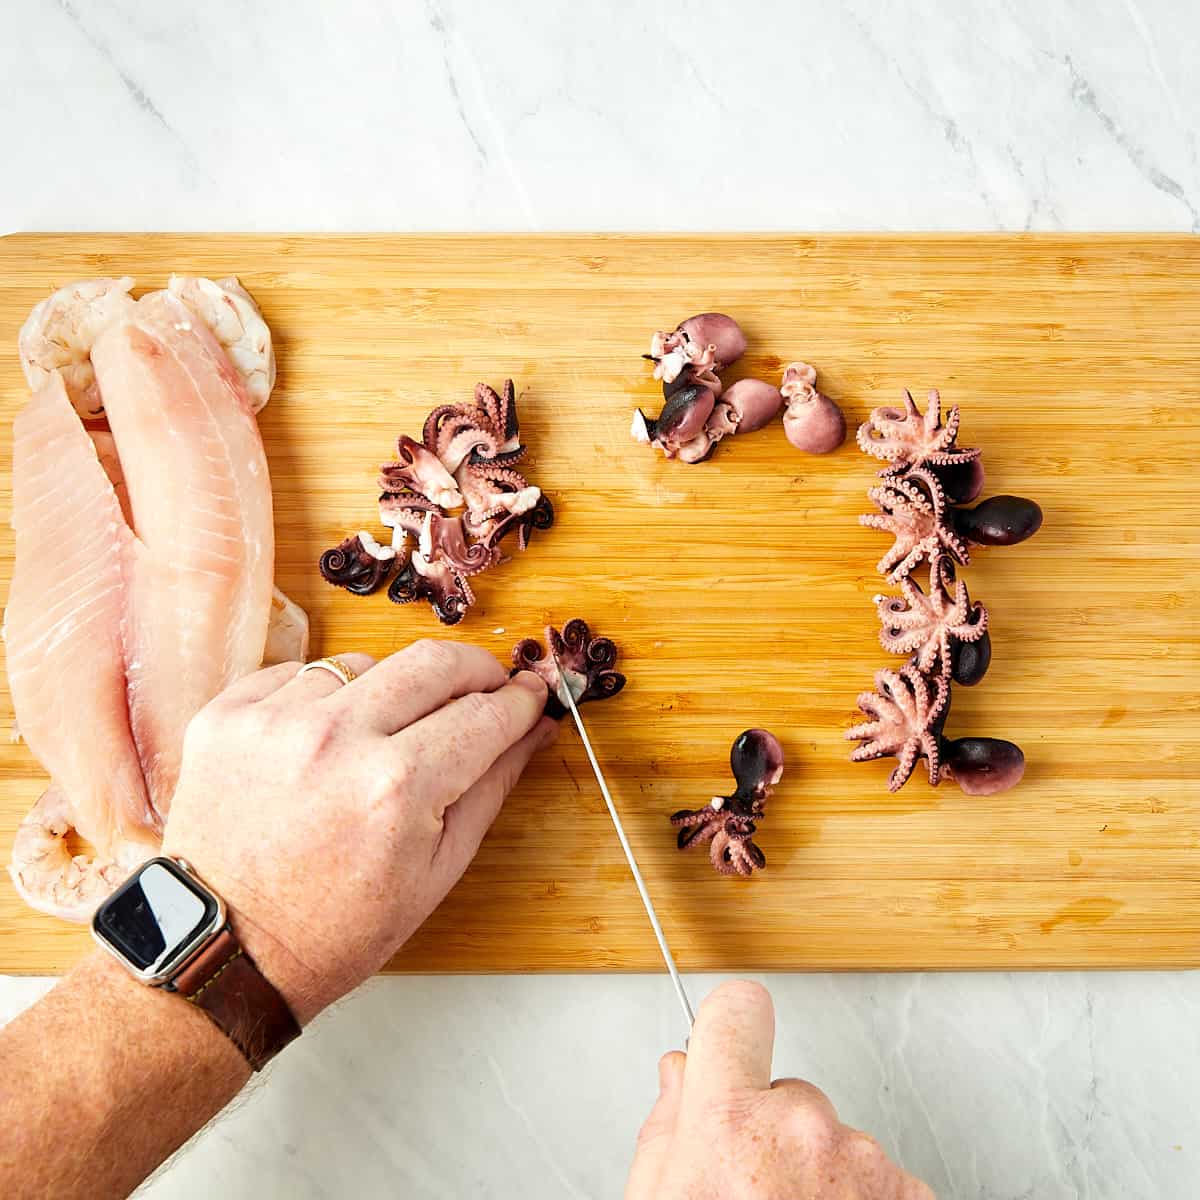 baby octopus being cut up into pieces on a cutting board